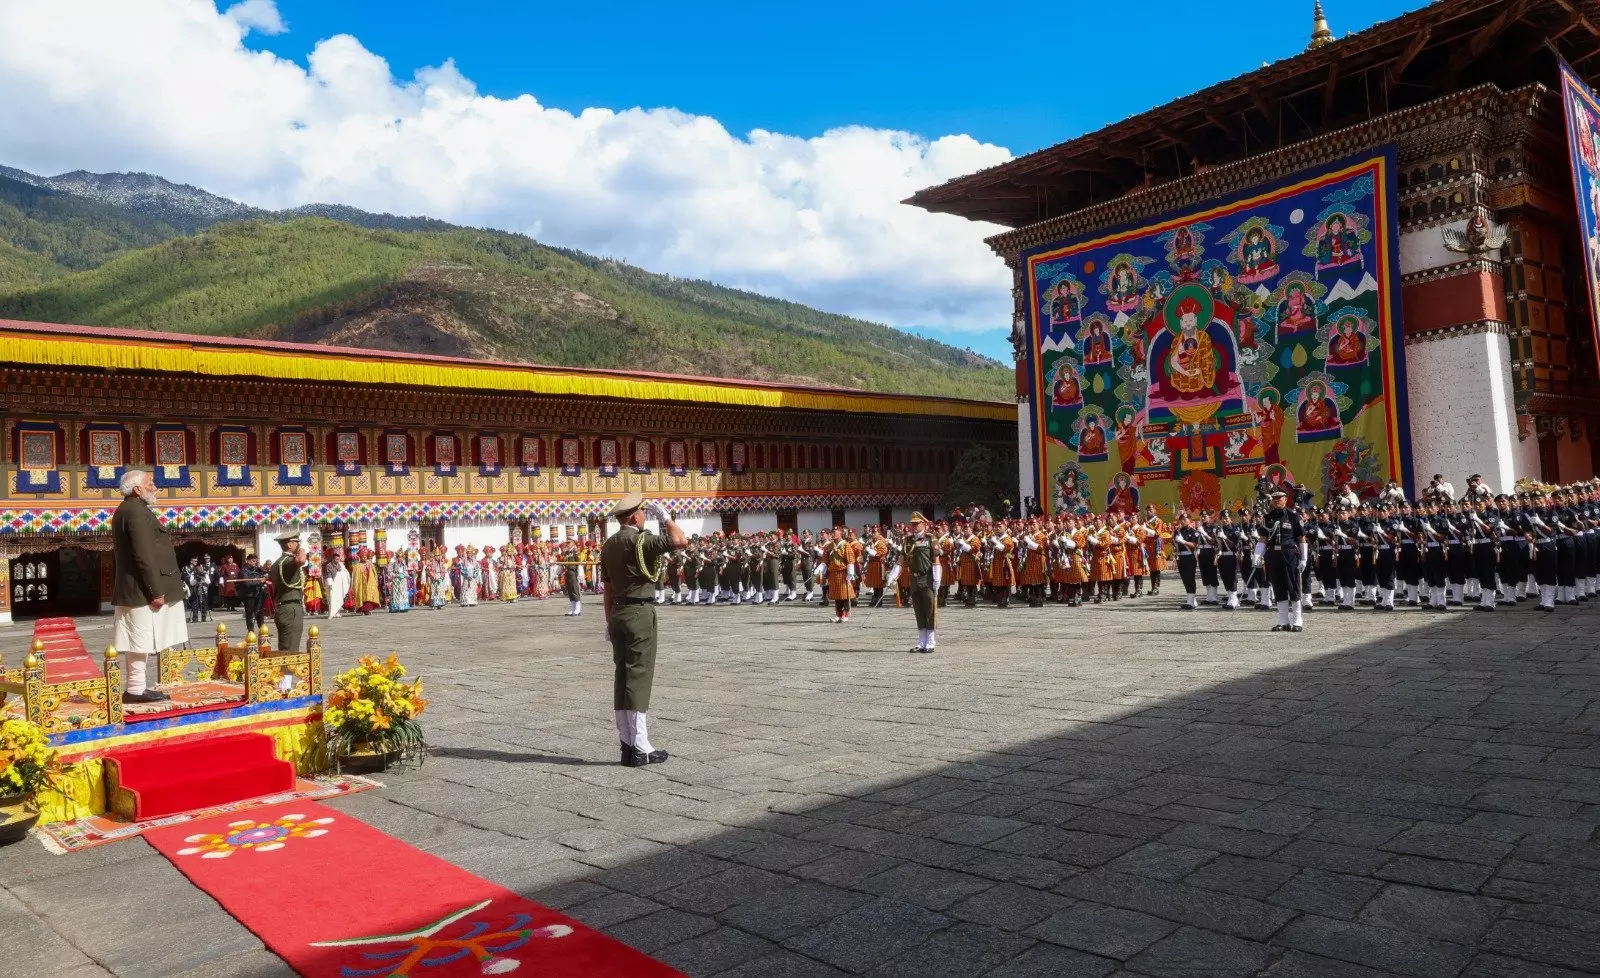 Bond between people of India and Bhutan makes relationship unique: PM Modi